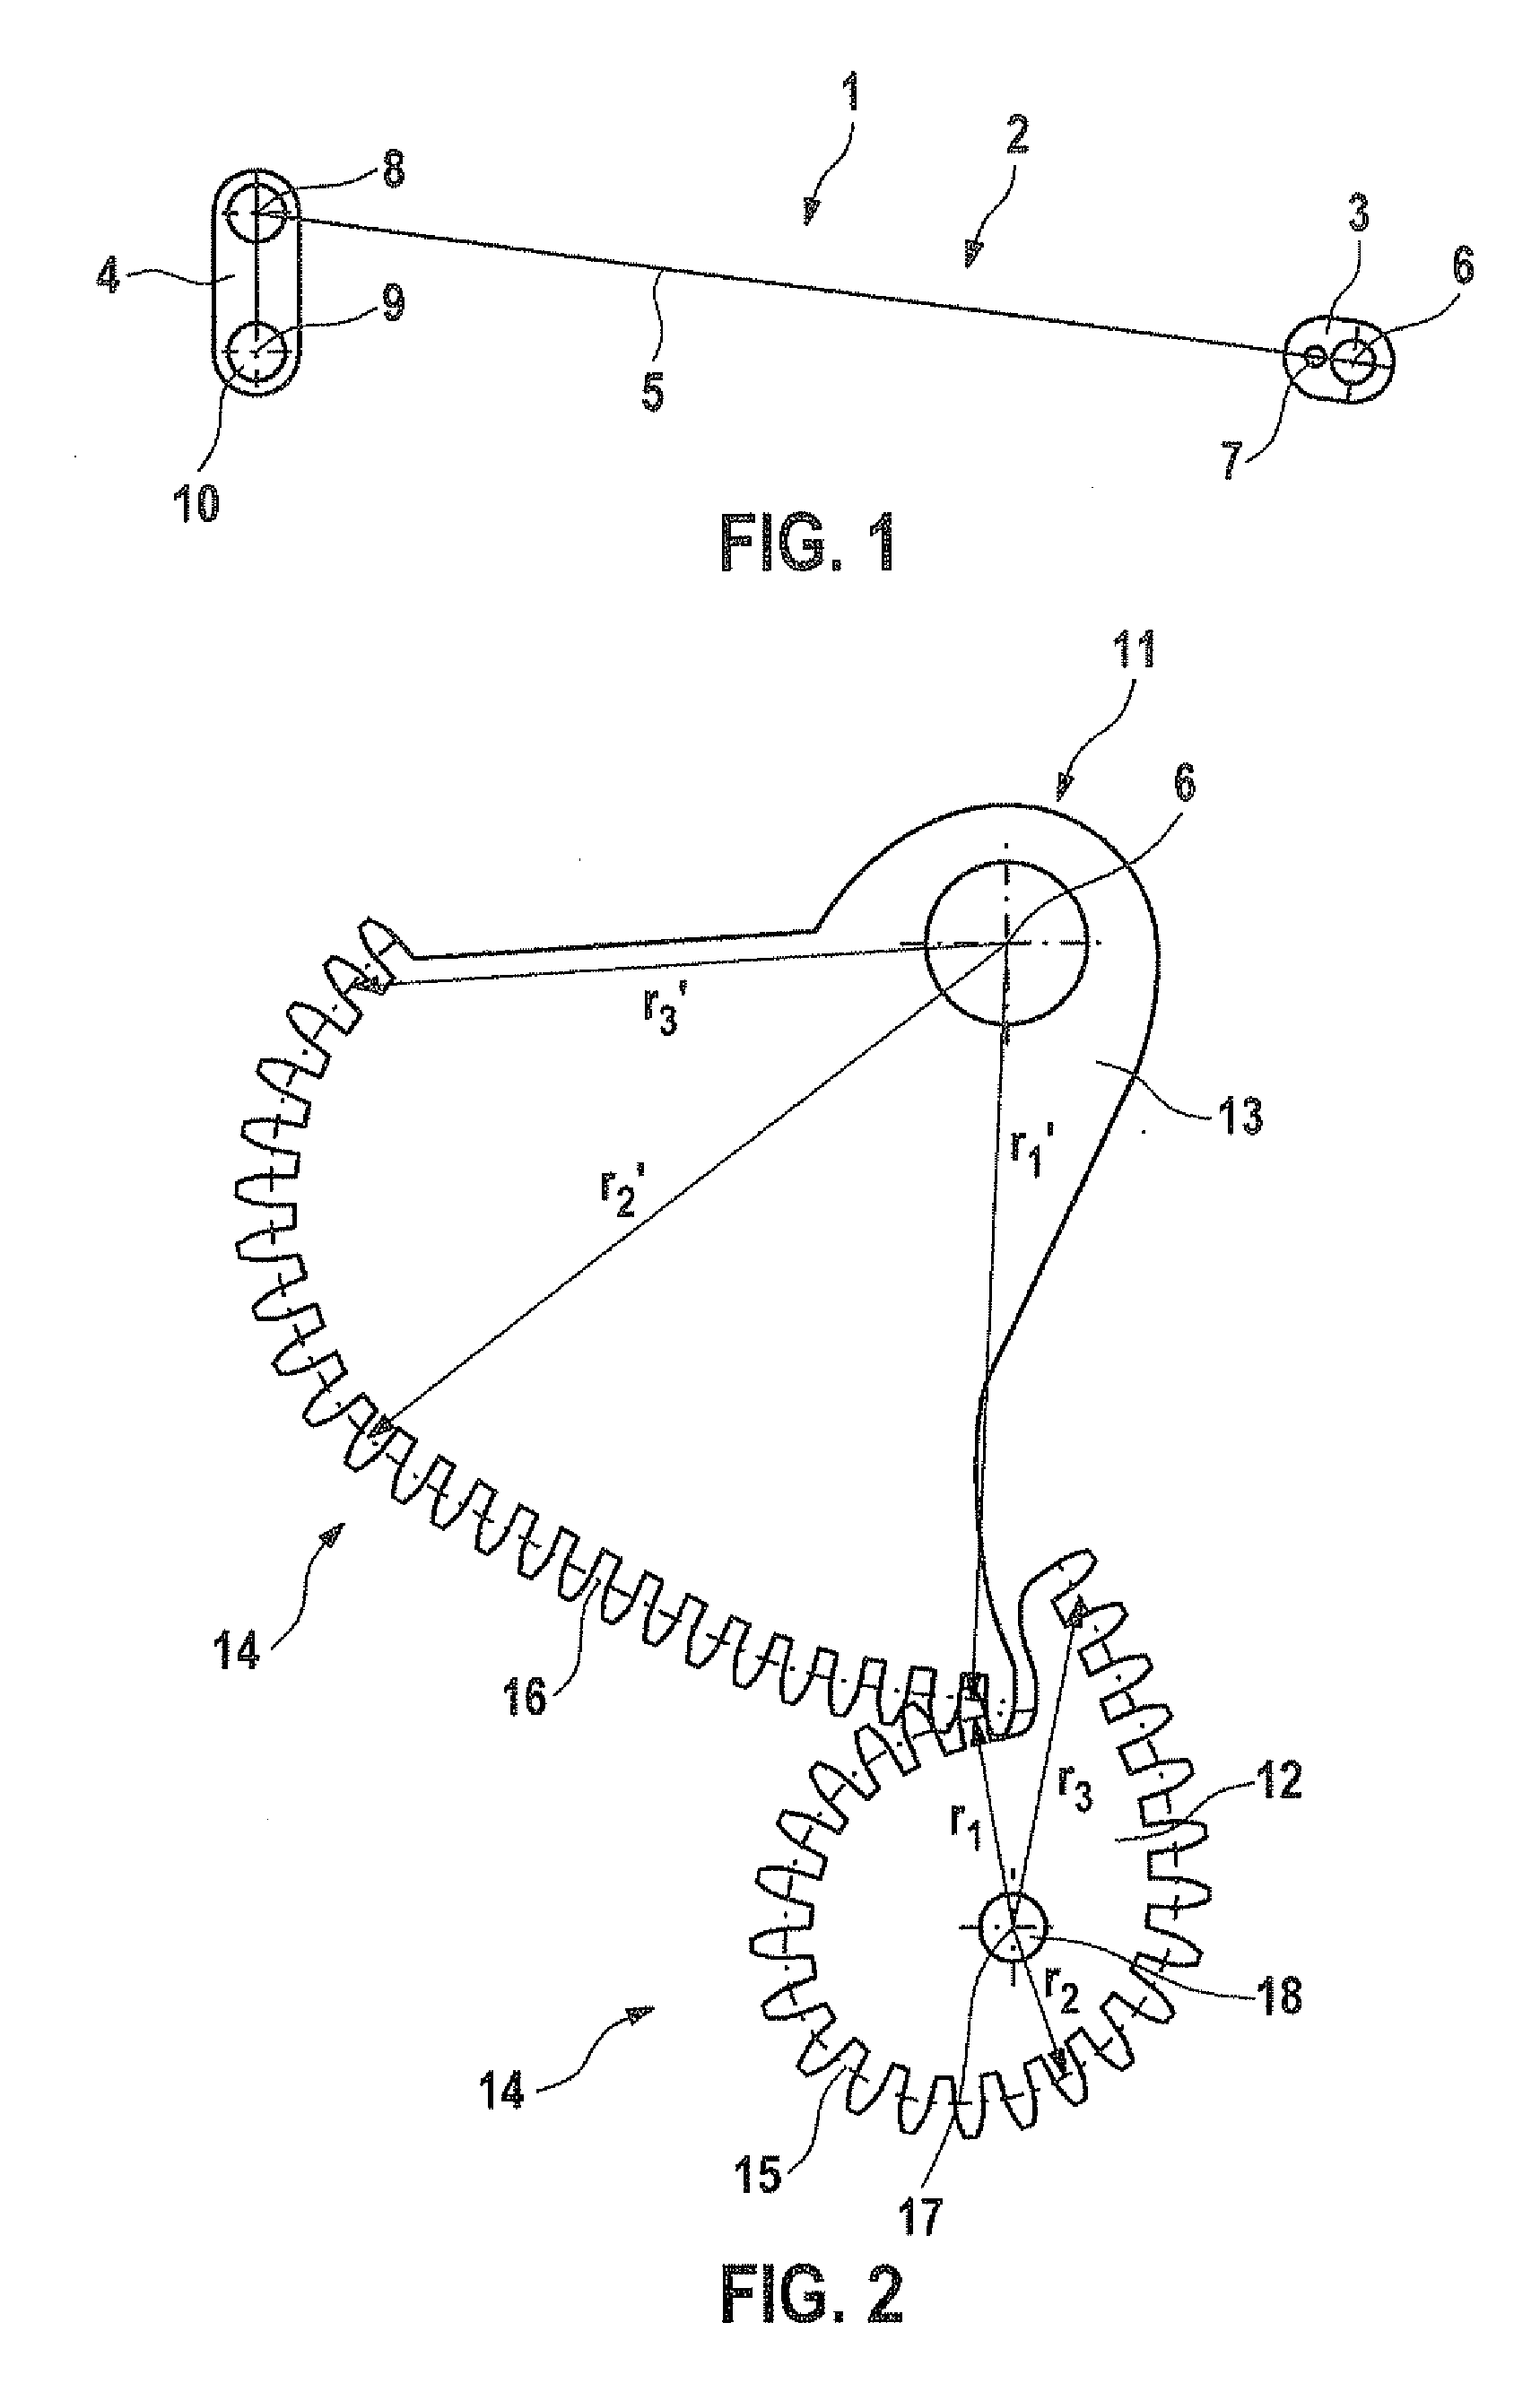 Transmission System and Exhaust Gas Turbocharger